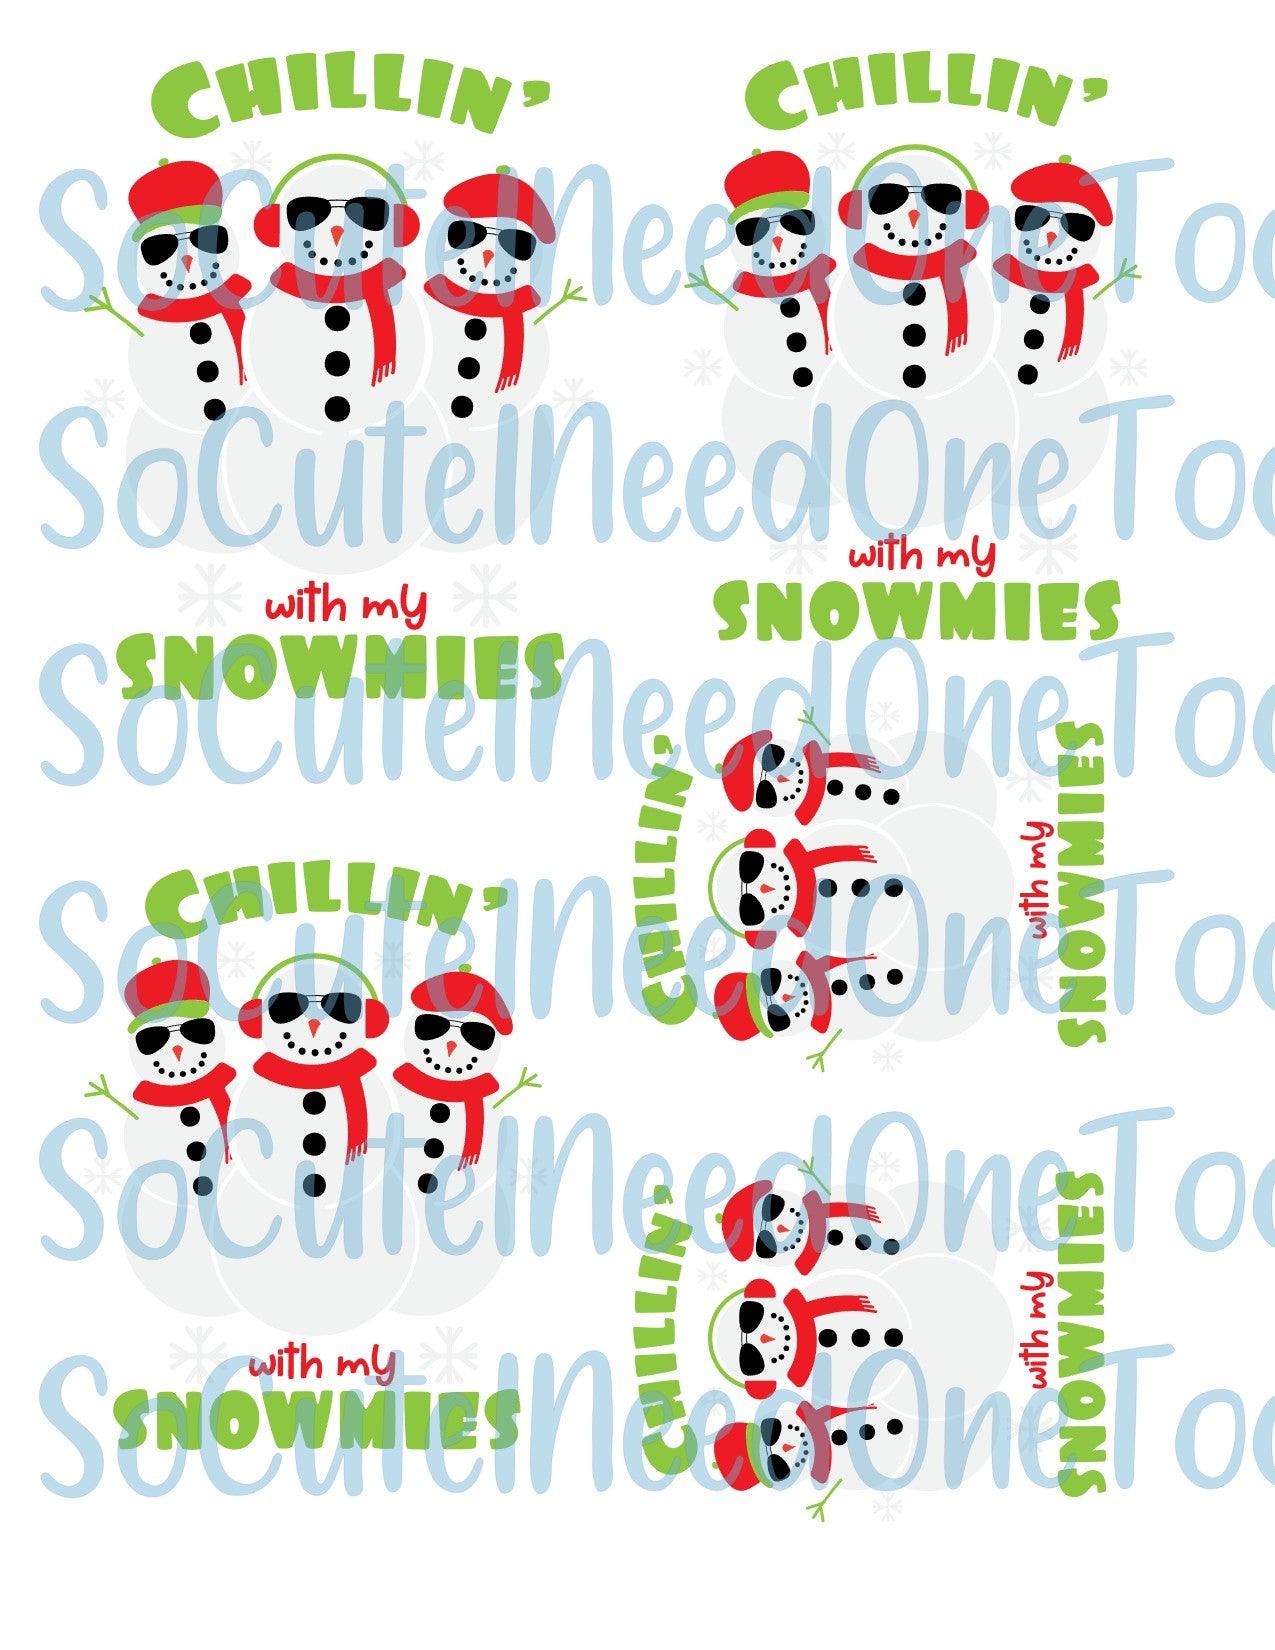 SNOWMIES - Full Sheet On Clear/White Waterslide Paper - Ready To Use - SoCuteINeedOneToo